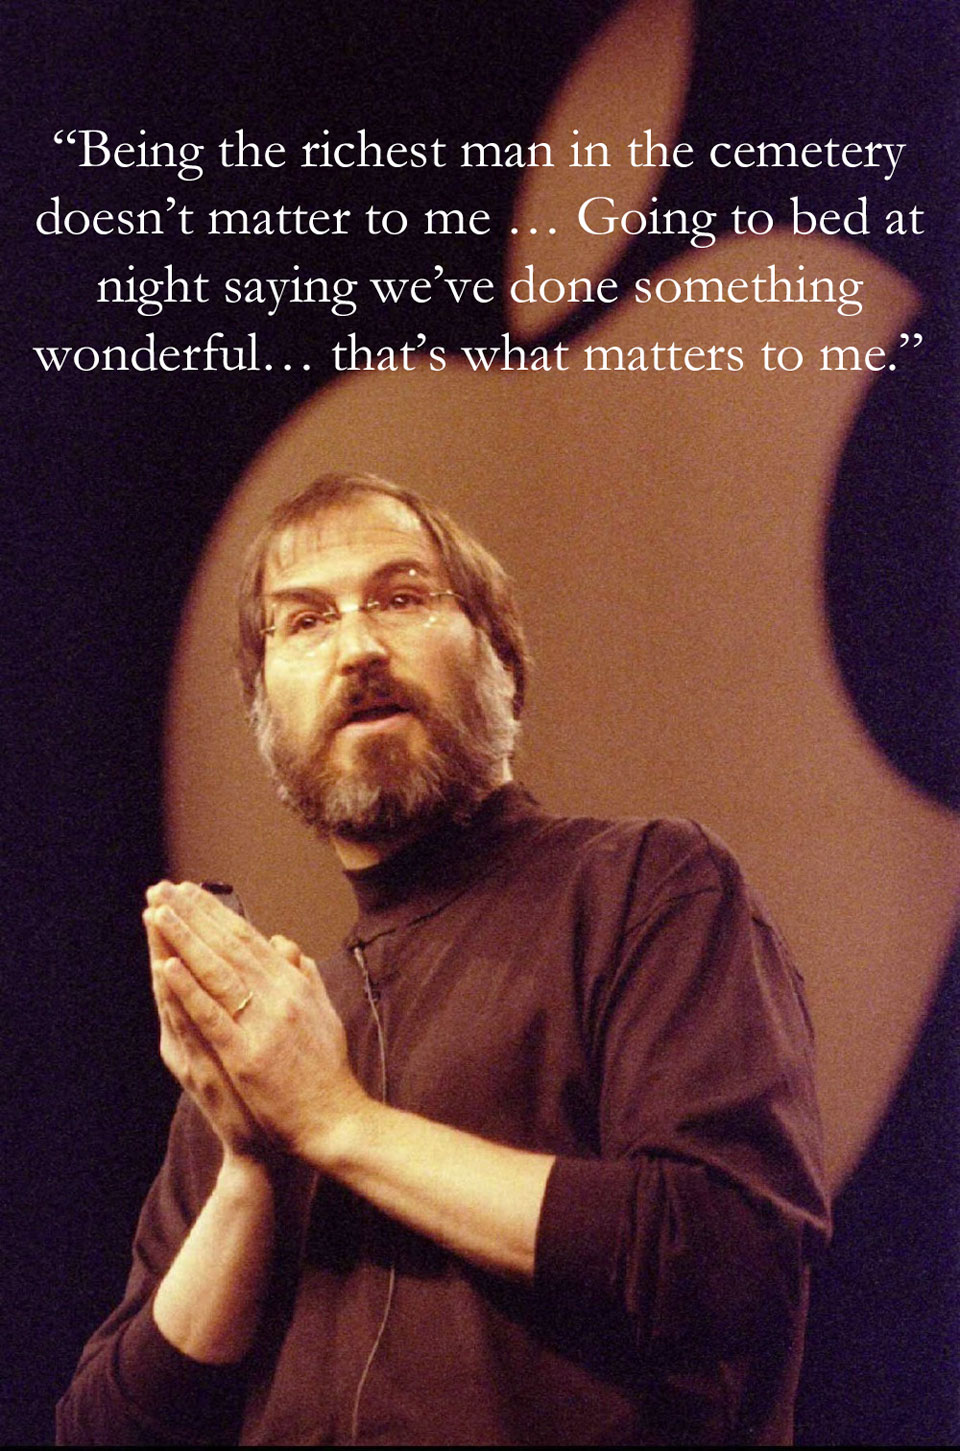 Steve Jobs  Quote (About wonderful RIP richest matters die change the world cemetery)